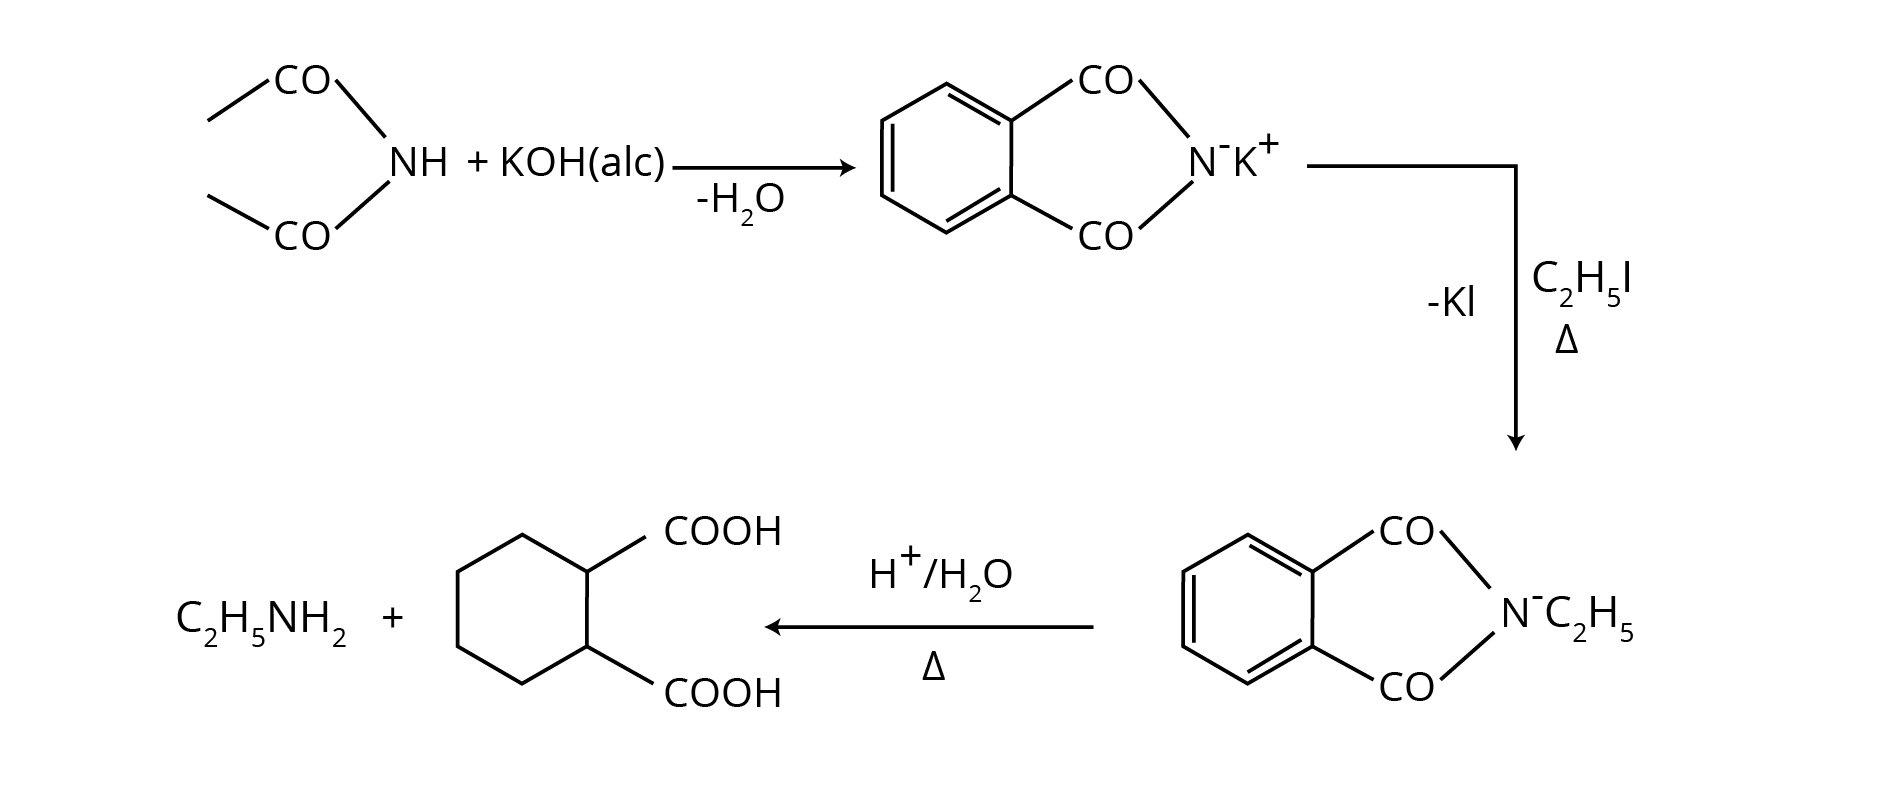 Gabriel Phthalimide Synthesis